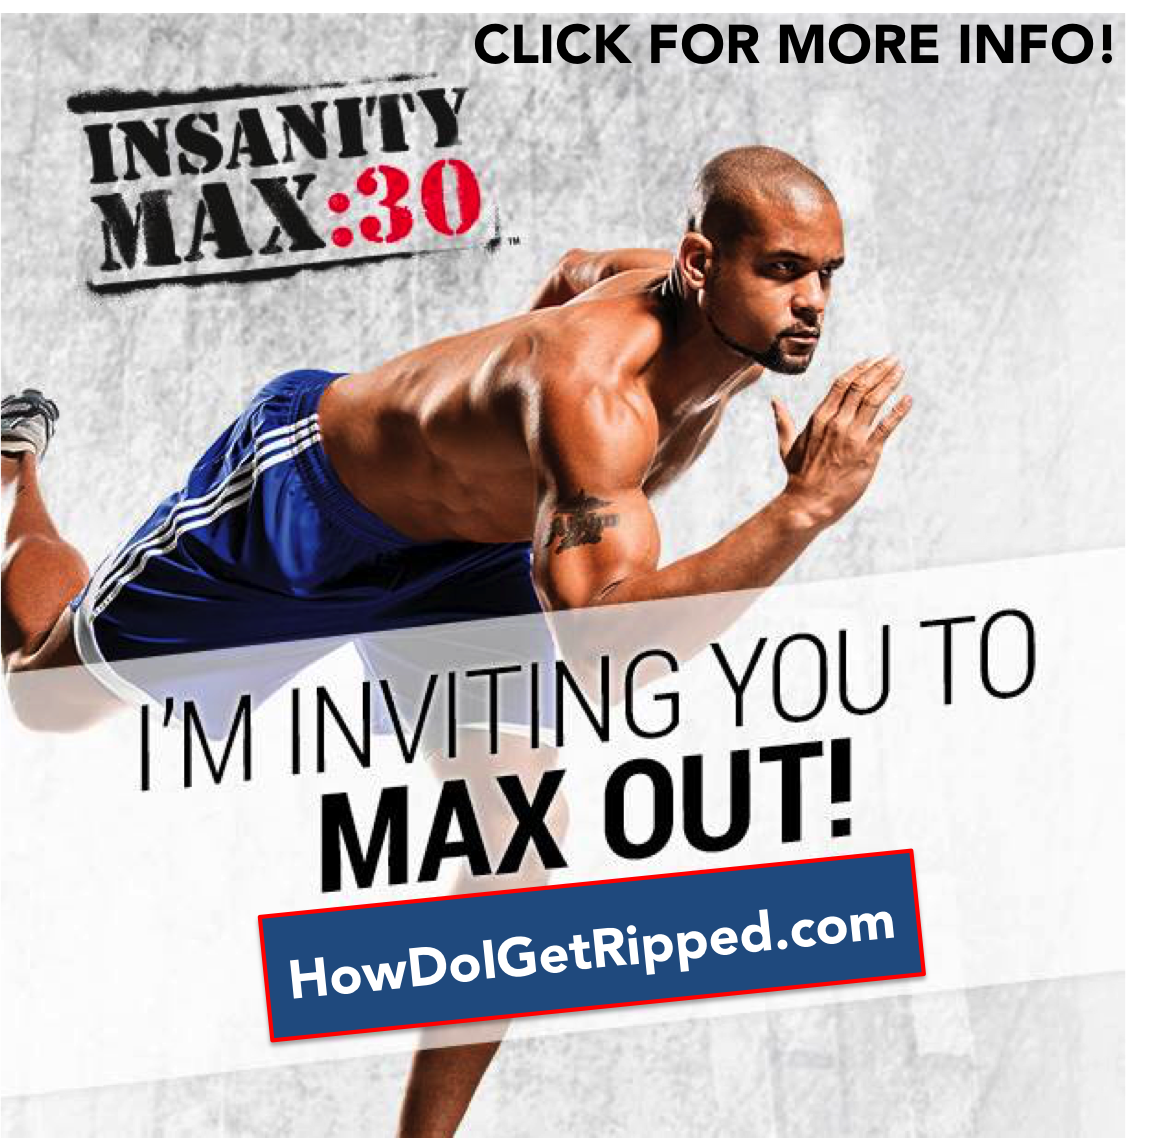 Insanity Max:30 Review